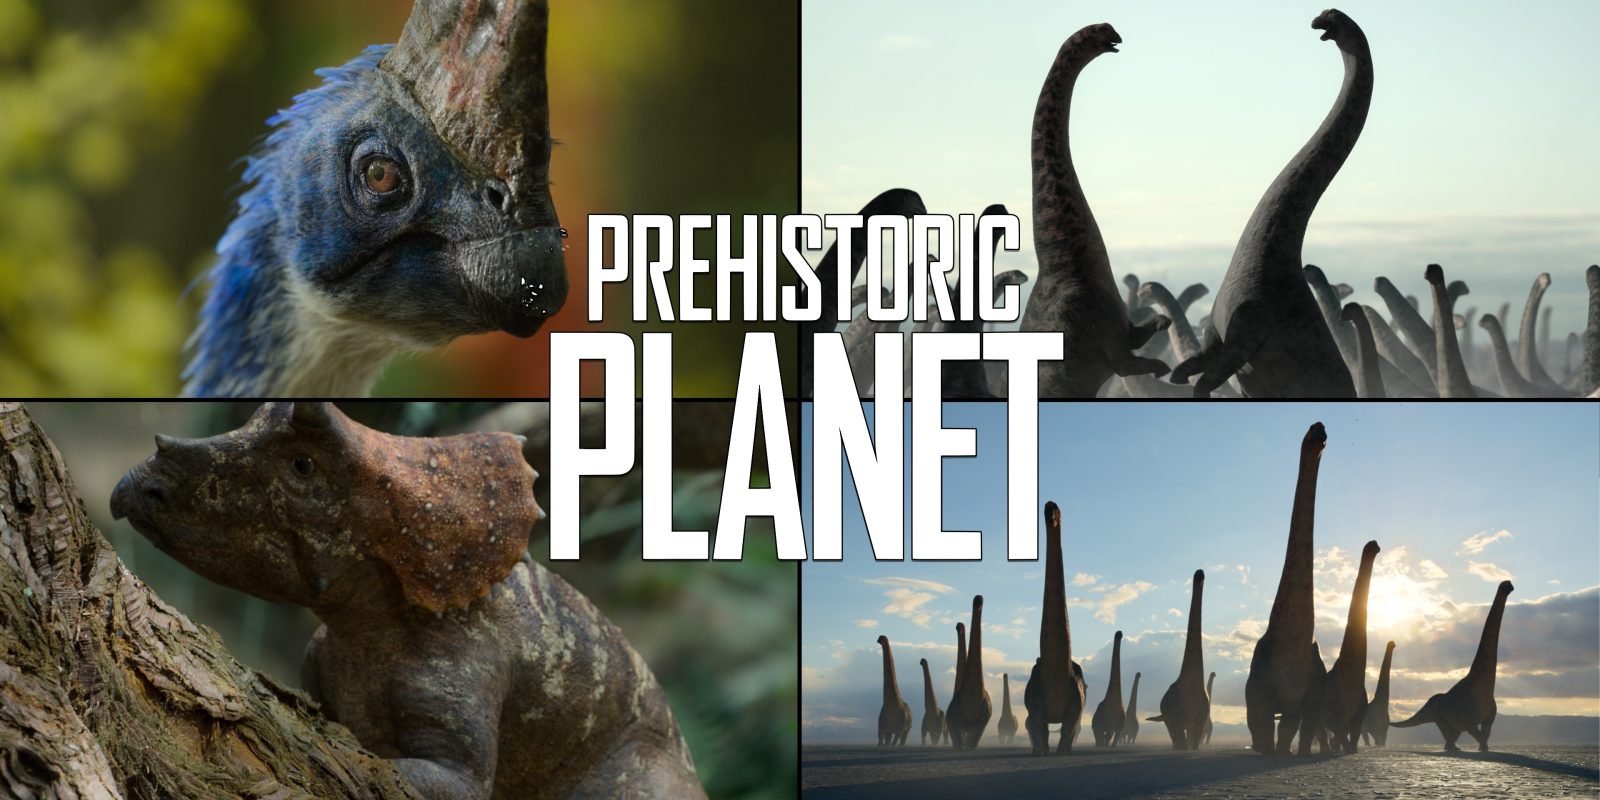 Prehistoric Planet: How to watch the new dinosaur docuseries - 9to5Mac